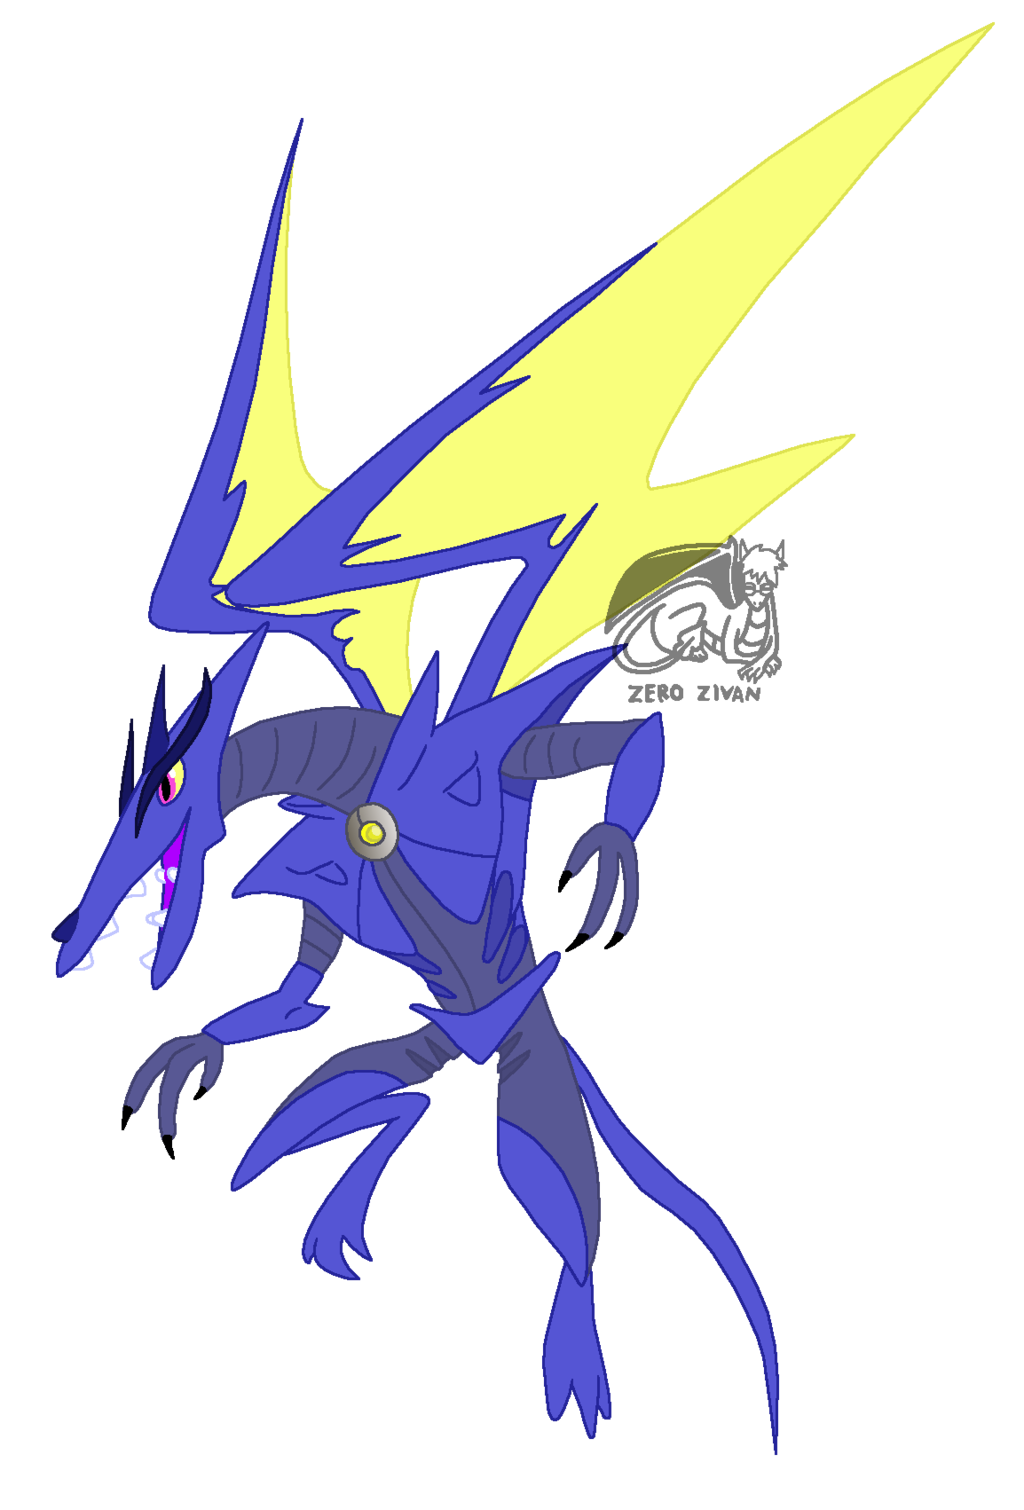 Inverted Gaming - Ridley